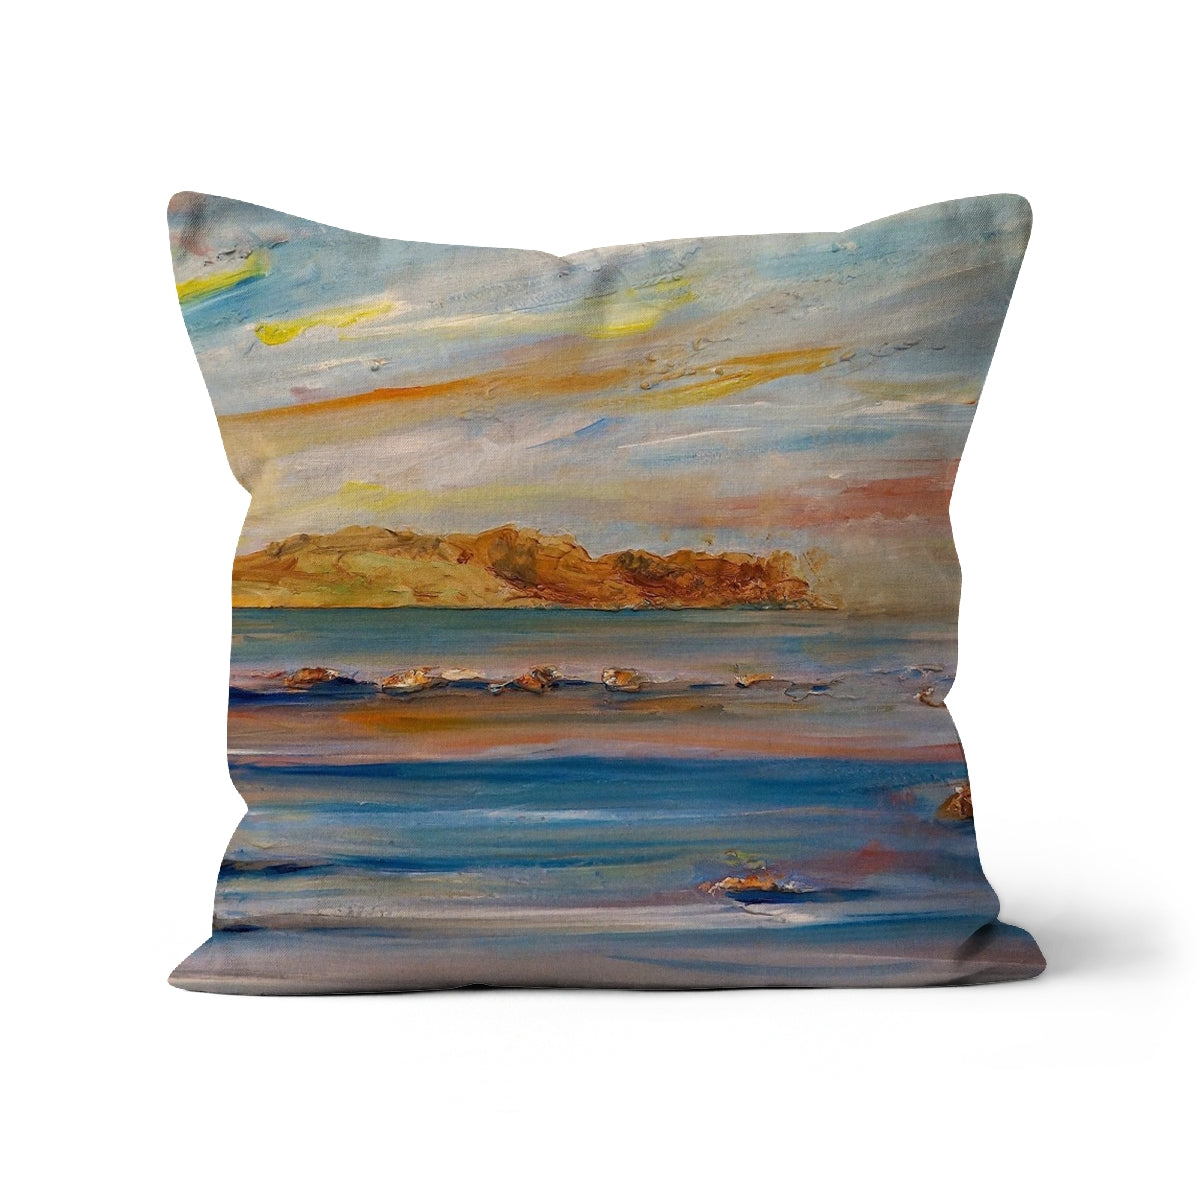 Tiree Dawn Art Gifts Cushion-Cushions-Hebridean Islands Art Gallery-Linen-22"x22"-Paintings, Prints, Homeware, Art Gifts From Scotland By Scottish Artist Kevin Hunter